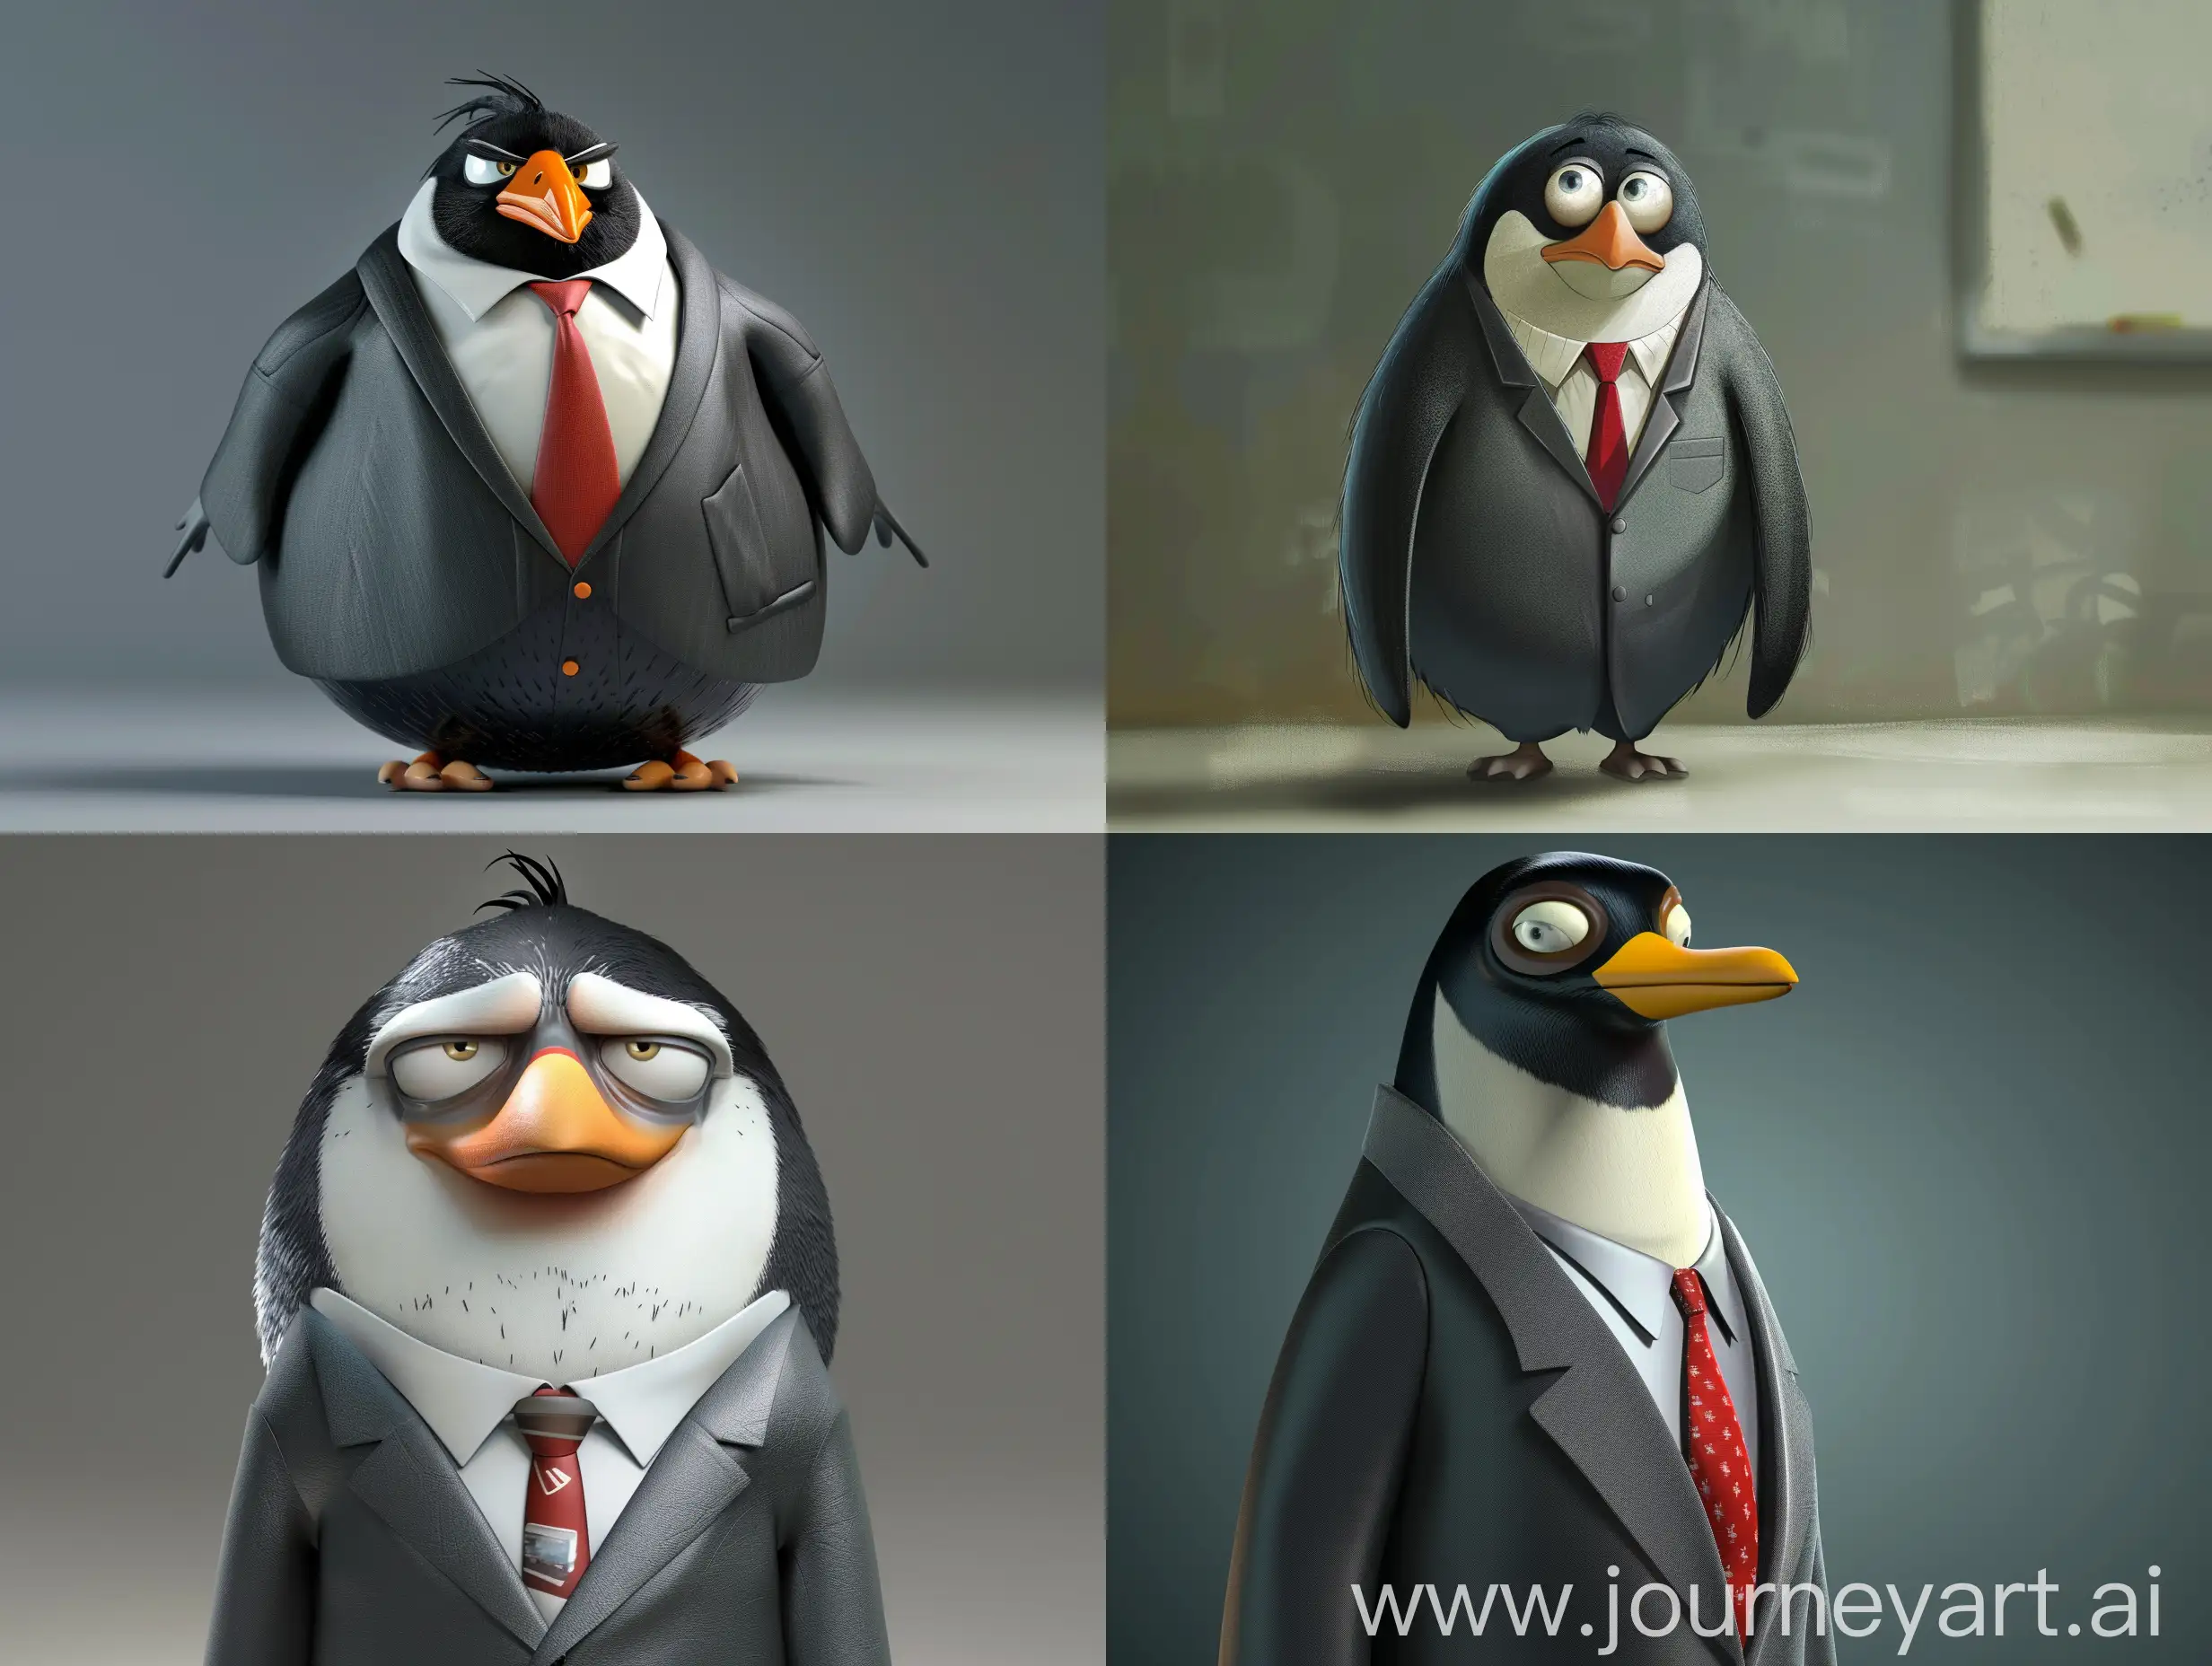 Project name: Creating a character for an educational video    The goal of the project is to create a serious, businesslike penguin dressed in an office suit for use in an educational video.    Character Description: - A penguin should have a serious expression on his face, but at the same time be friendly and attractive to the audience. - He should be dressed in an office suit consisting of a white shirt, a red tie and a gray jacket. - A penguin must be tall and slender to look professional and authoritative. - His main character traits should be responsibility, decision-making skills and leadership qualities.    Character characteristics: - Name: Peter - Age: 30 years - Profession: Head of Marketing Department - Hobbies: Reading business literature, playing the piano    Design requirements: - The penguin must be painted in high quality, with good detail and elaboration of details. - He must have expressive eyes and a lively expression on his face. - The colors of the clothes should be bright and contrasting to attract the viewer's attention.    Additional information: - The character will be used in an educational video about business and management. - It should be recognizable and memorable for the audience. - The penguin must be animated so that its movements and gestures can be transmitted.